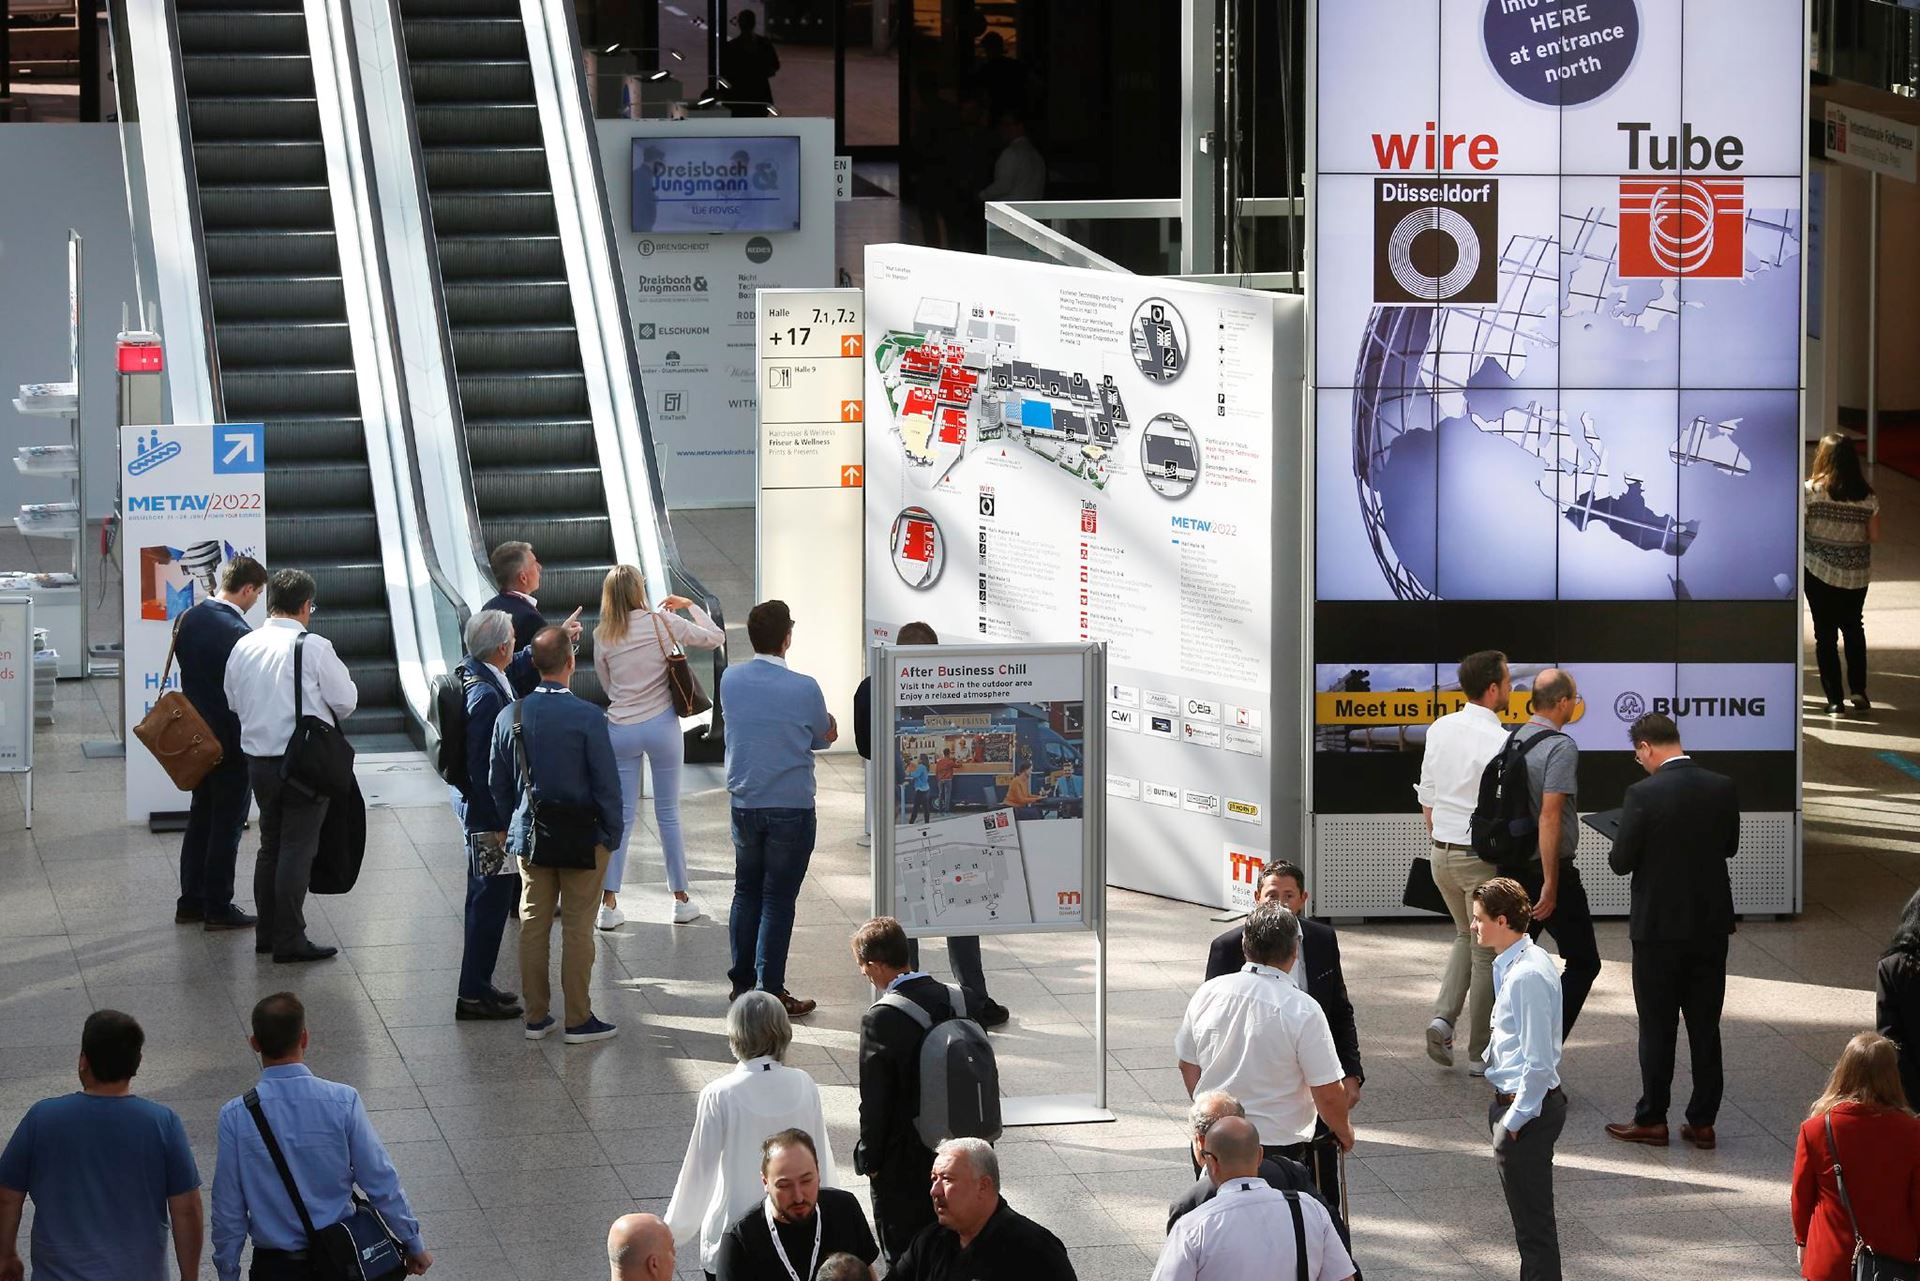 Cable, wire and tube industry will meet at Wire & Tube Düsseldorf